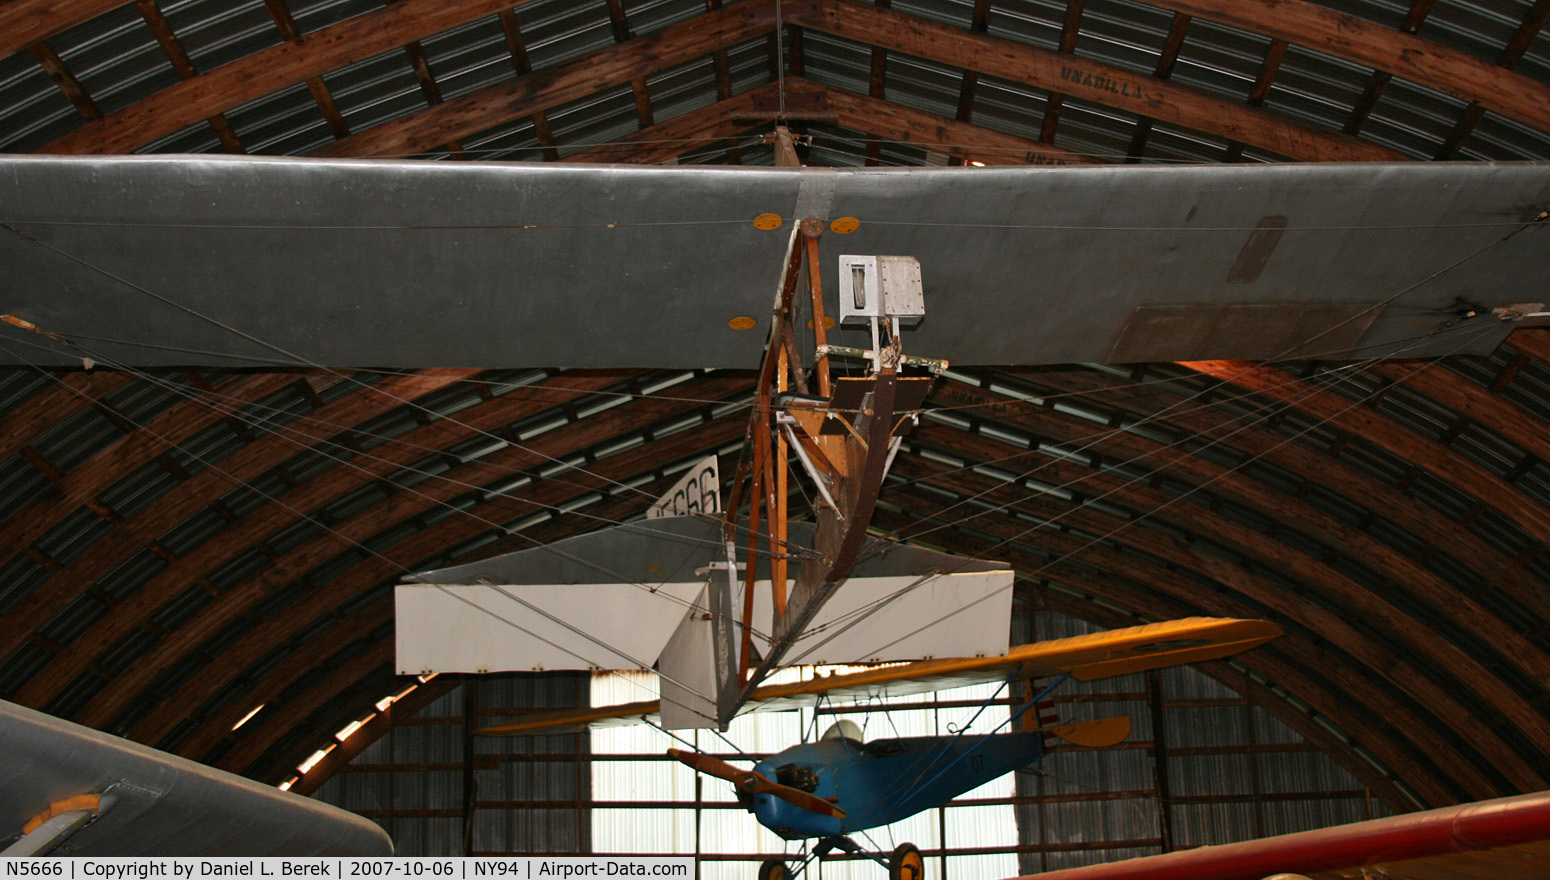 N5666, 1969 Dickson PRIMARY GLIDER C/N PHC-1, This unusual glider, built in 1969, now resides at the Rhinebeck Aerodrome Museum.